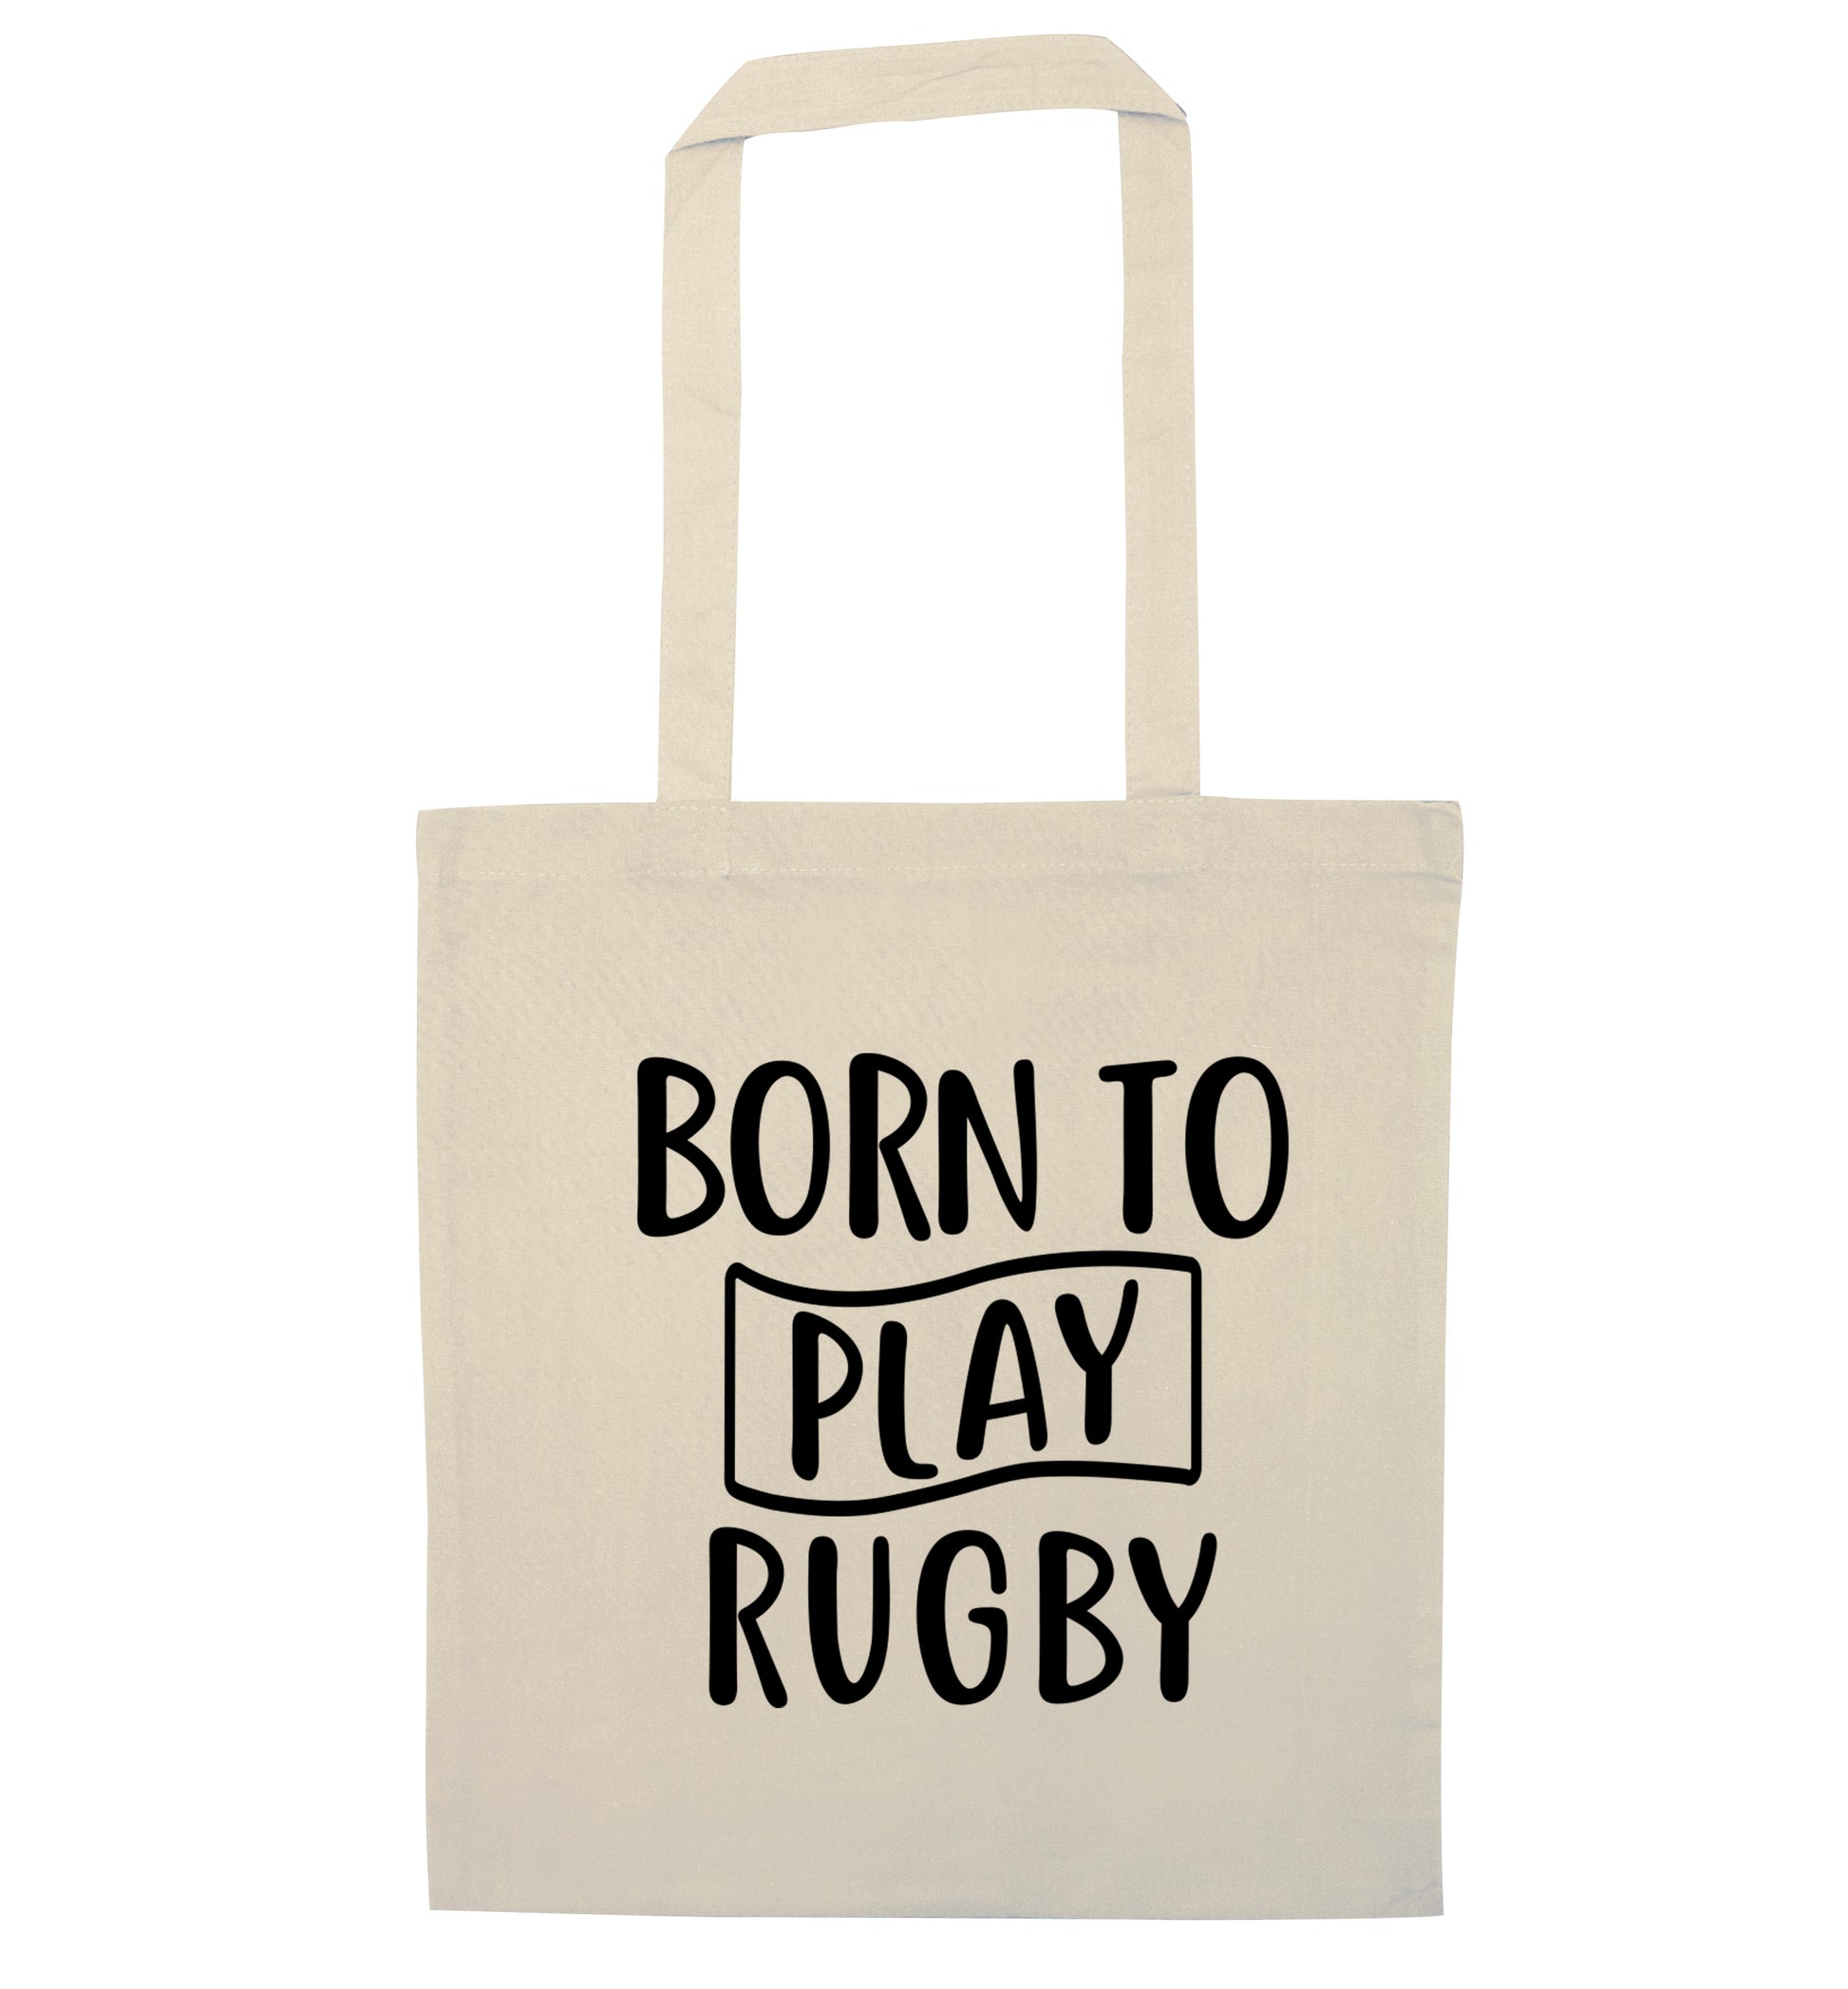 Born to play rugby natural tote bag